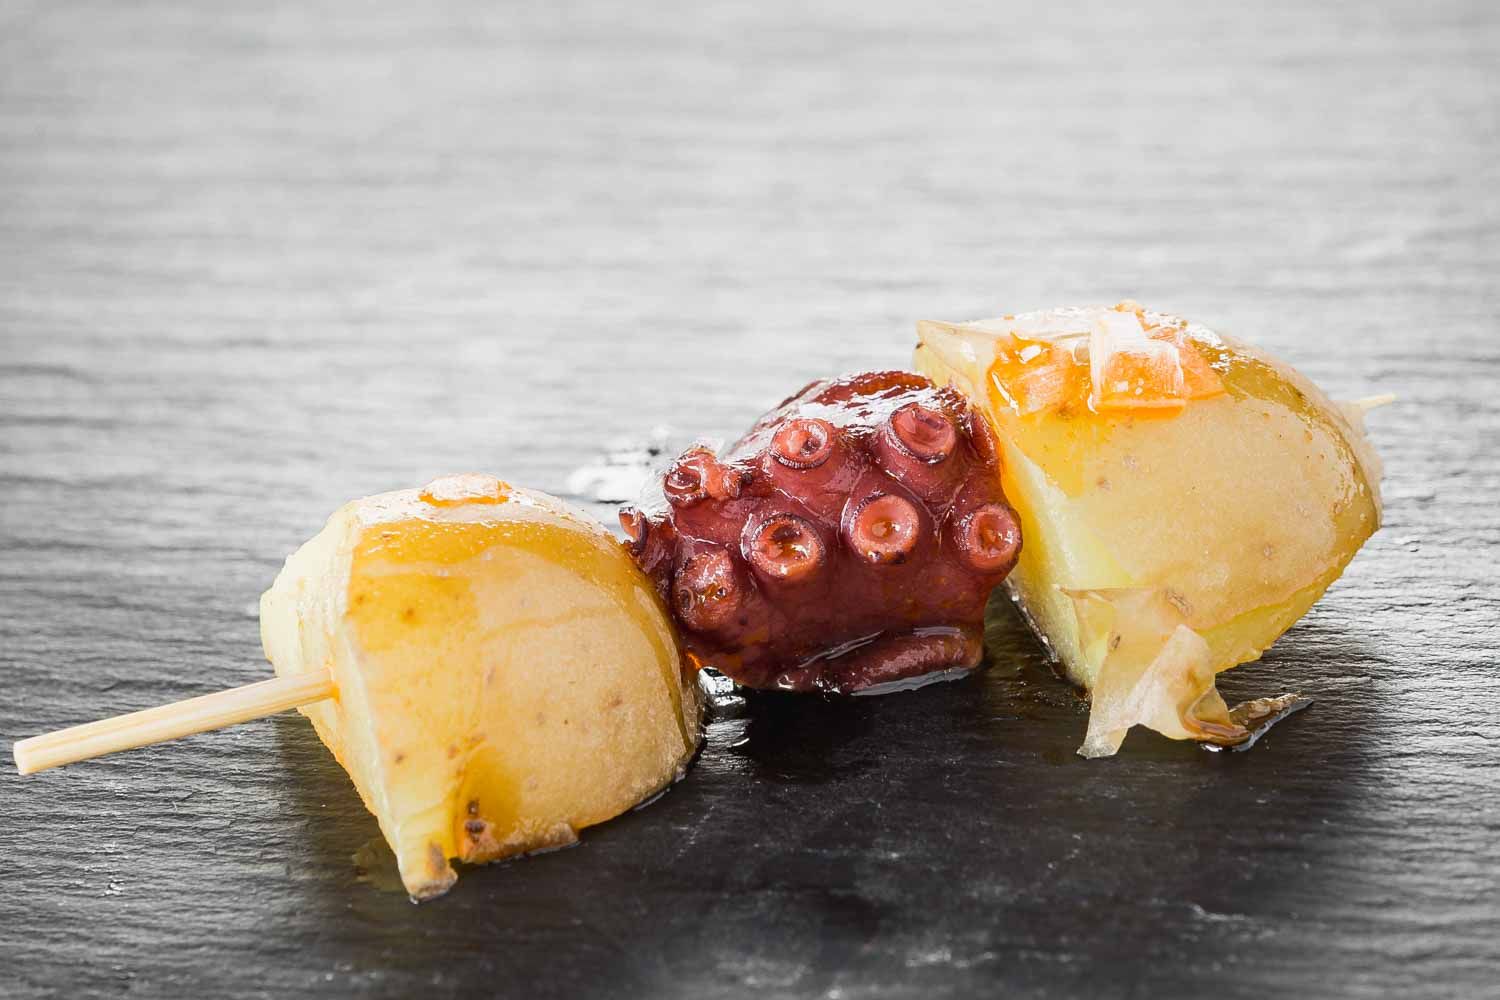 Potato and octopus skewer